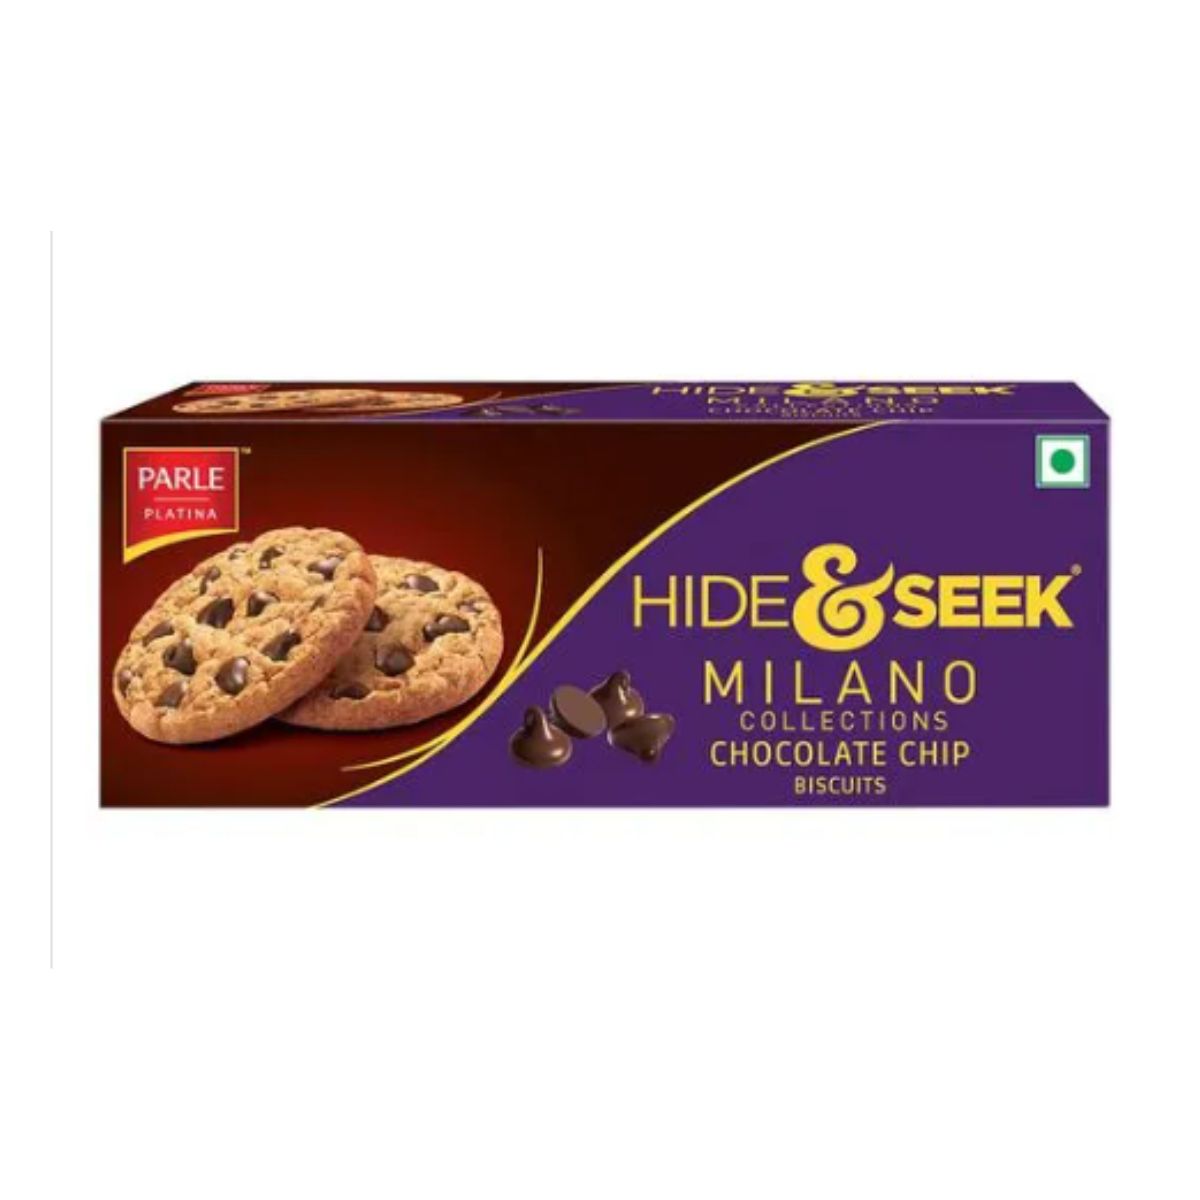 Parle Platina Hide & Seek - Milano Collections Chocolate Chip Biscuits - 75g